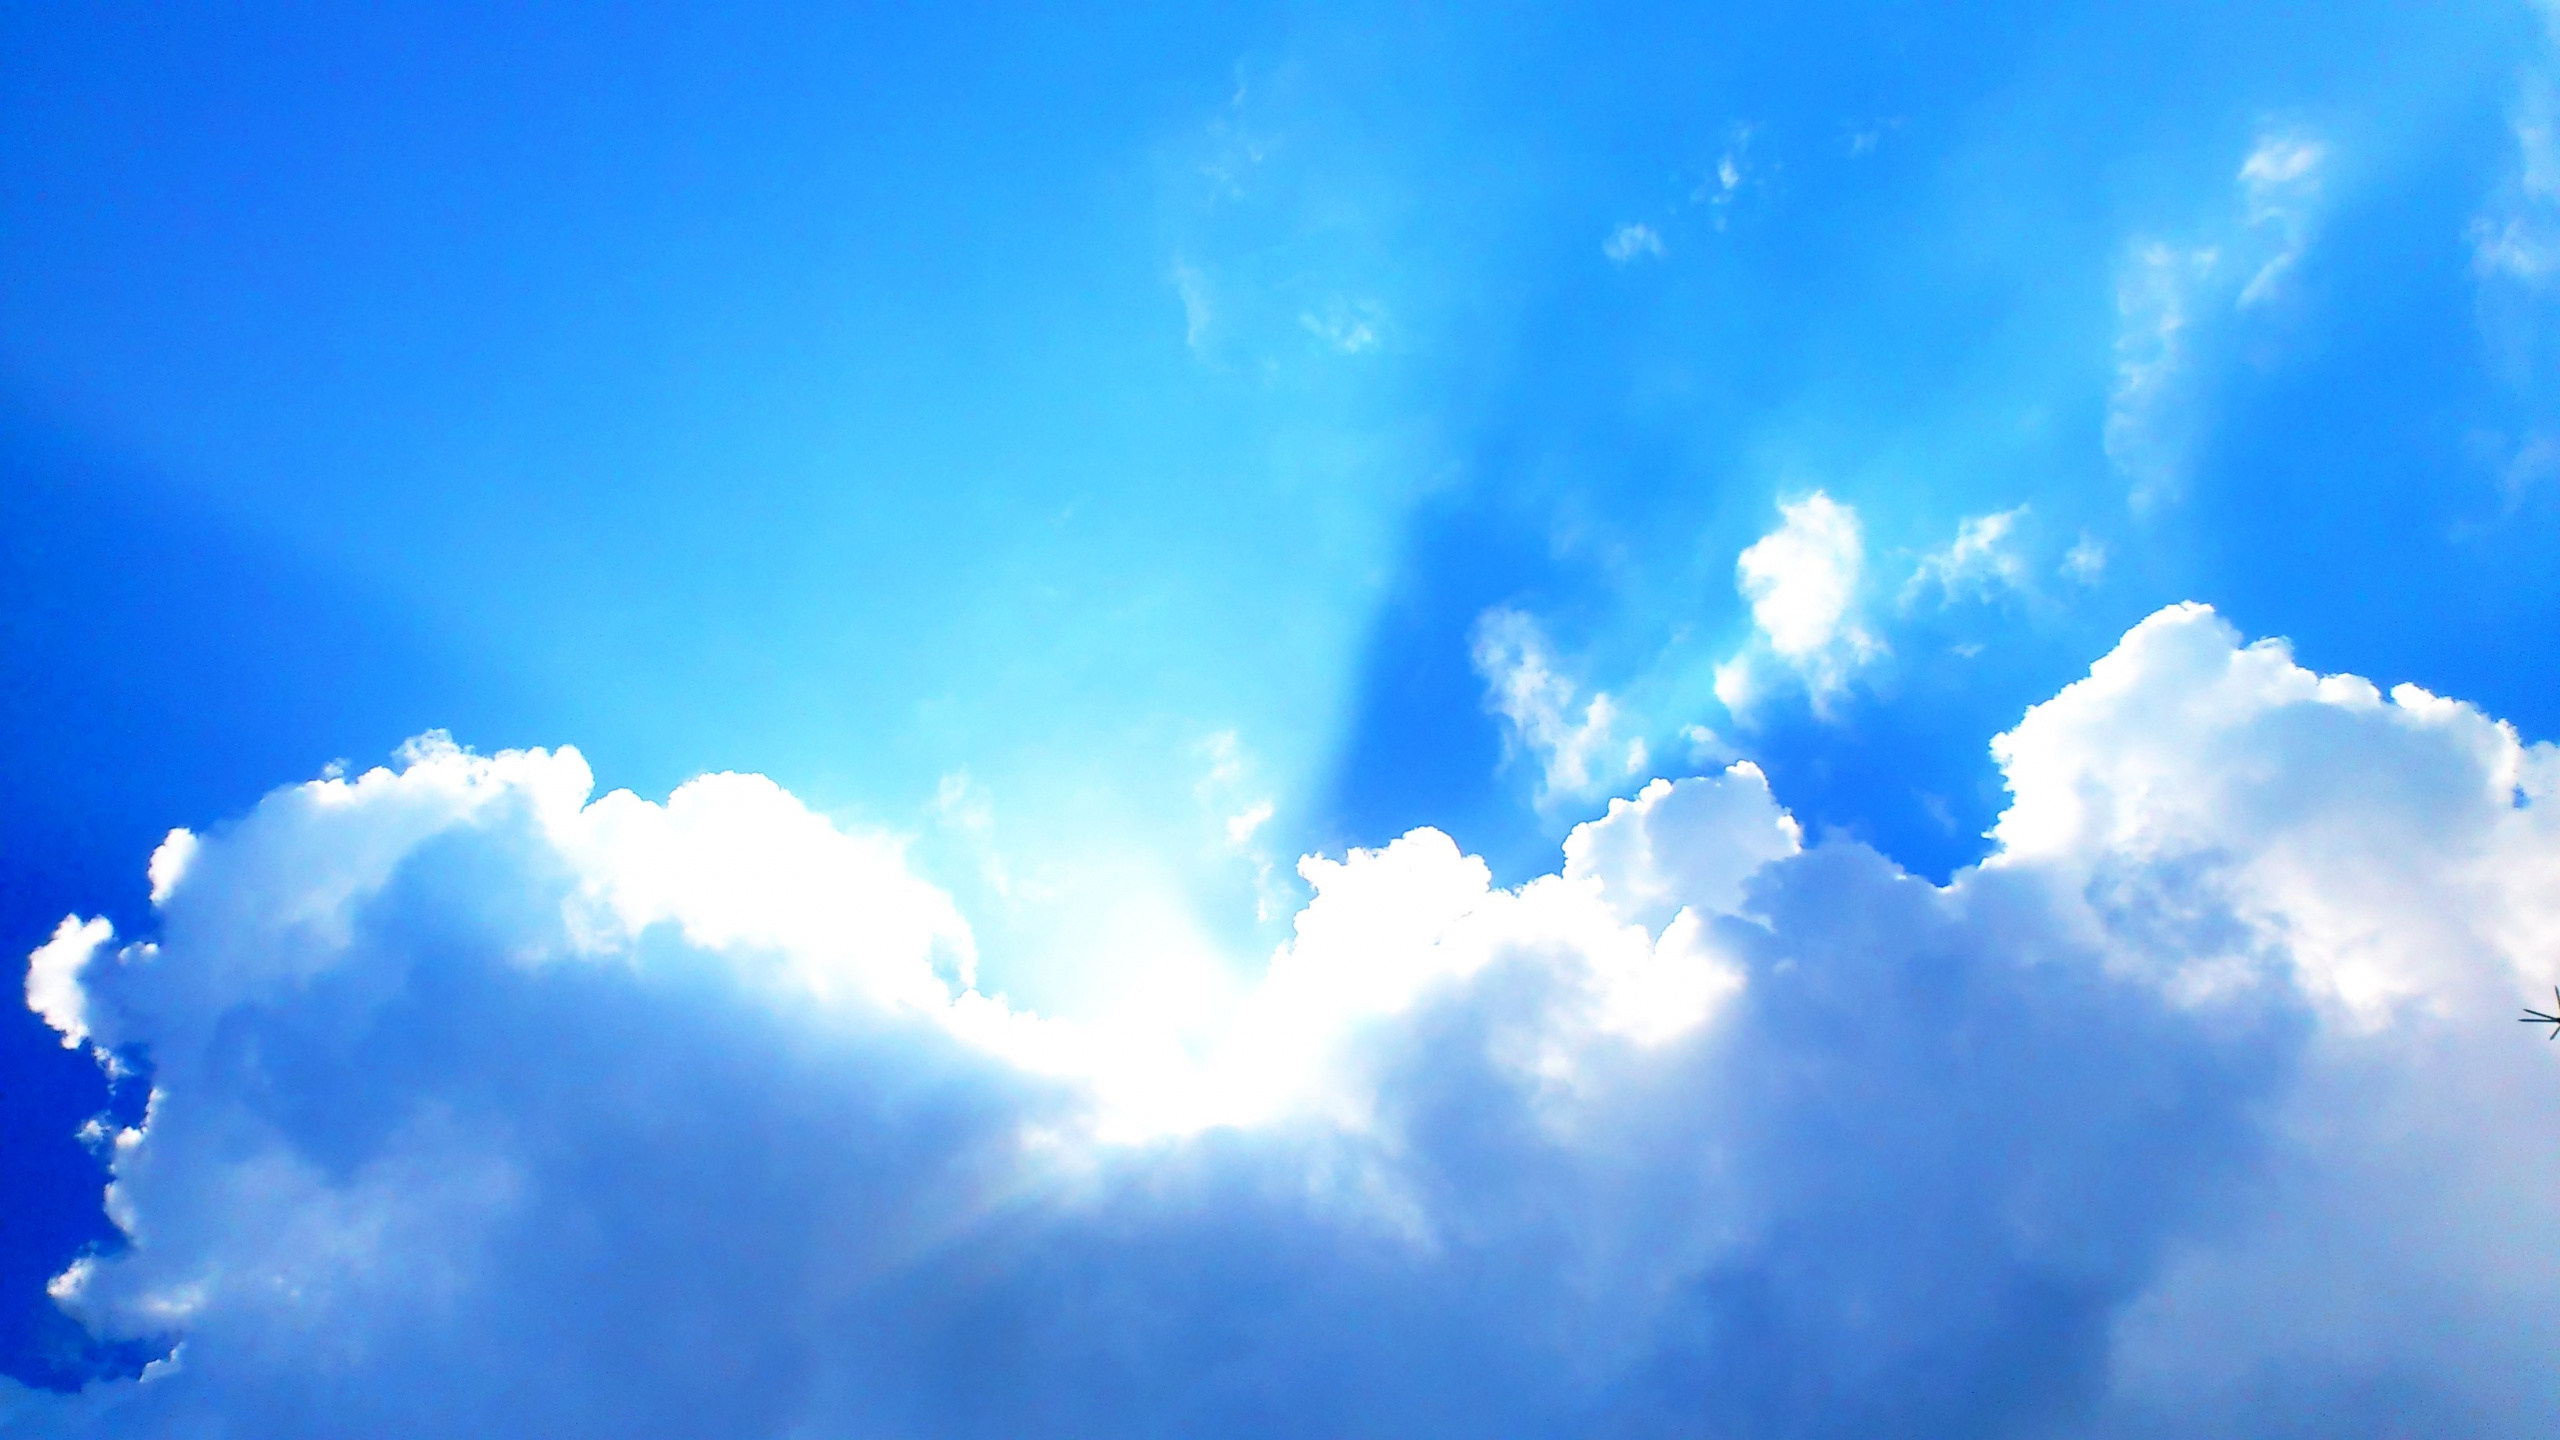 White Clouds and Blue Sky During Daytime. Wallpaper in 2560x1440 Resolution